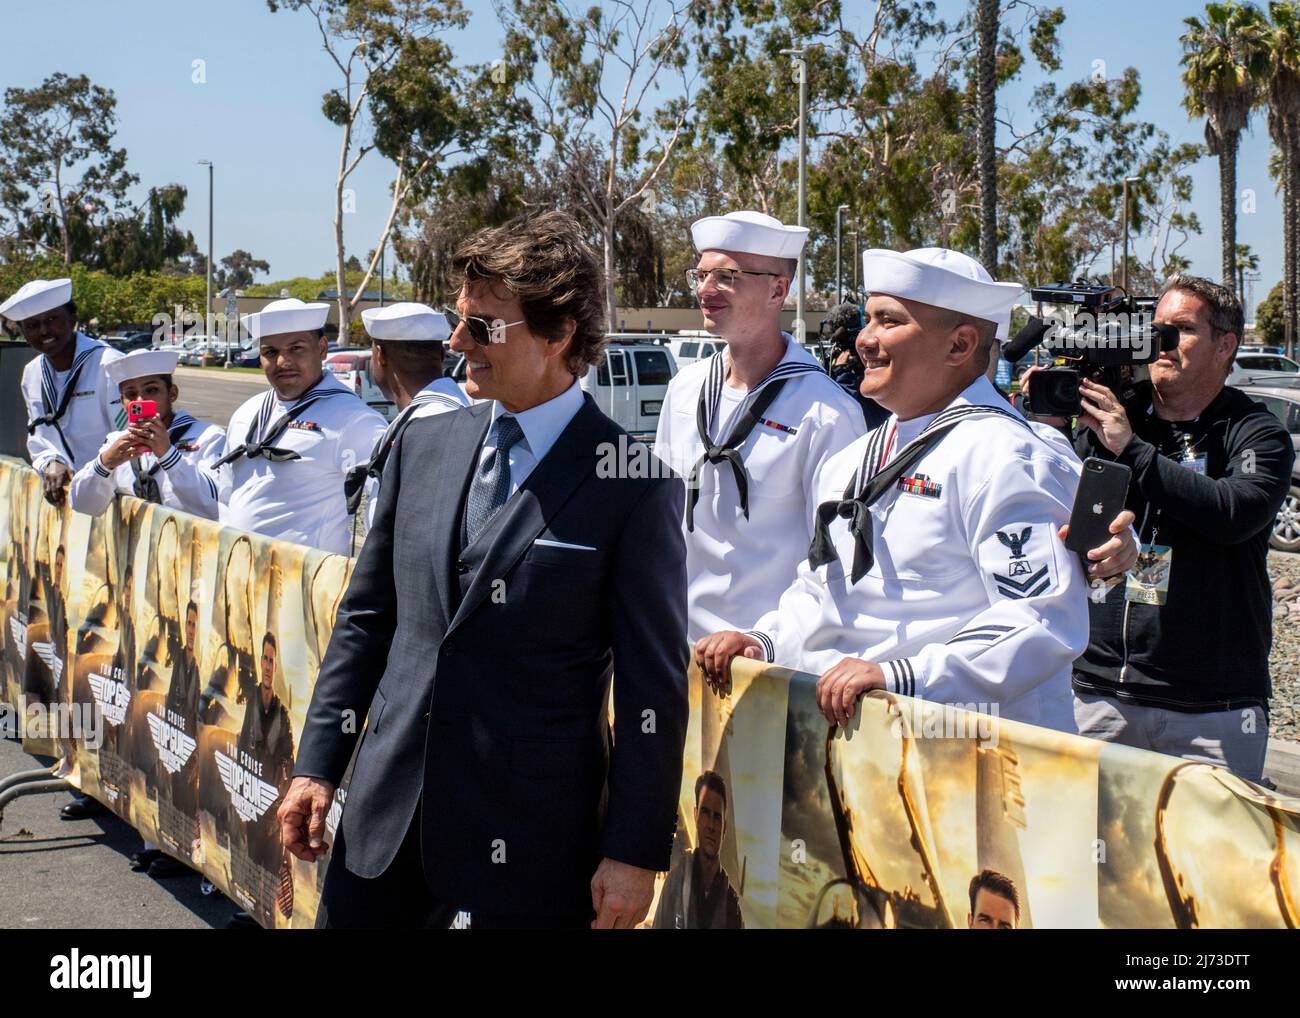 San Diego, United States. 04 May, 2022. American actor Tom Cruise poses with sailors on the red carpet during the advance movie premiere of Top Gun: Maverick, at Naval Air Station North Island, May 4, 2022 in San Diego, California, Top Gun: Maverick, is the sequel to the 1986 blockbuster, Top Gun and will be released worldwide on May 27.  Credit: MC2 Keenan Daniels/US Navy/Alamy Live News Stock Photo